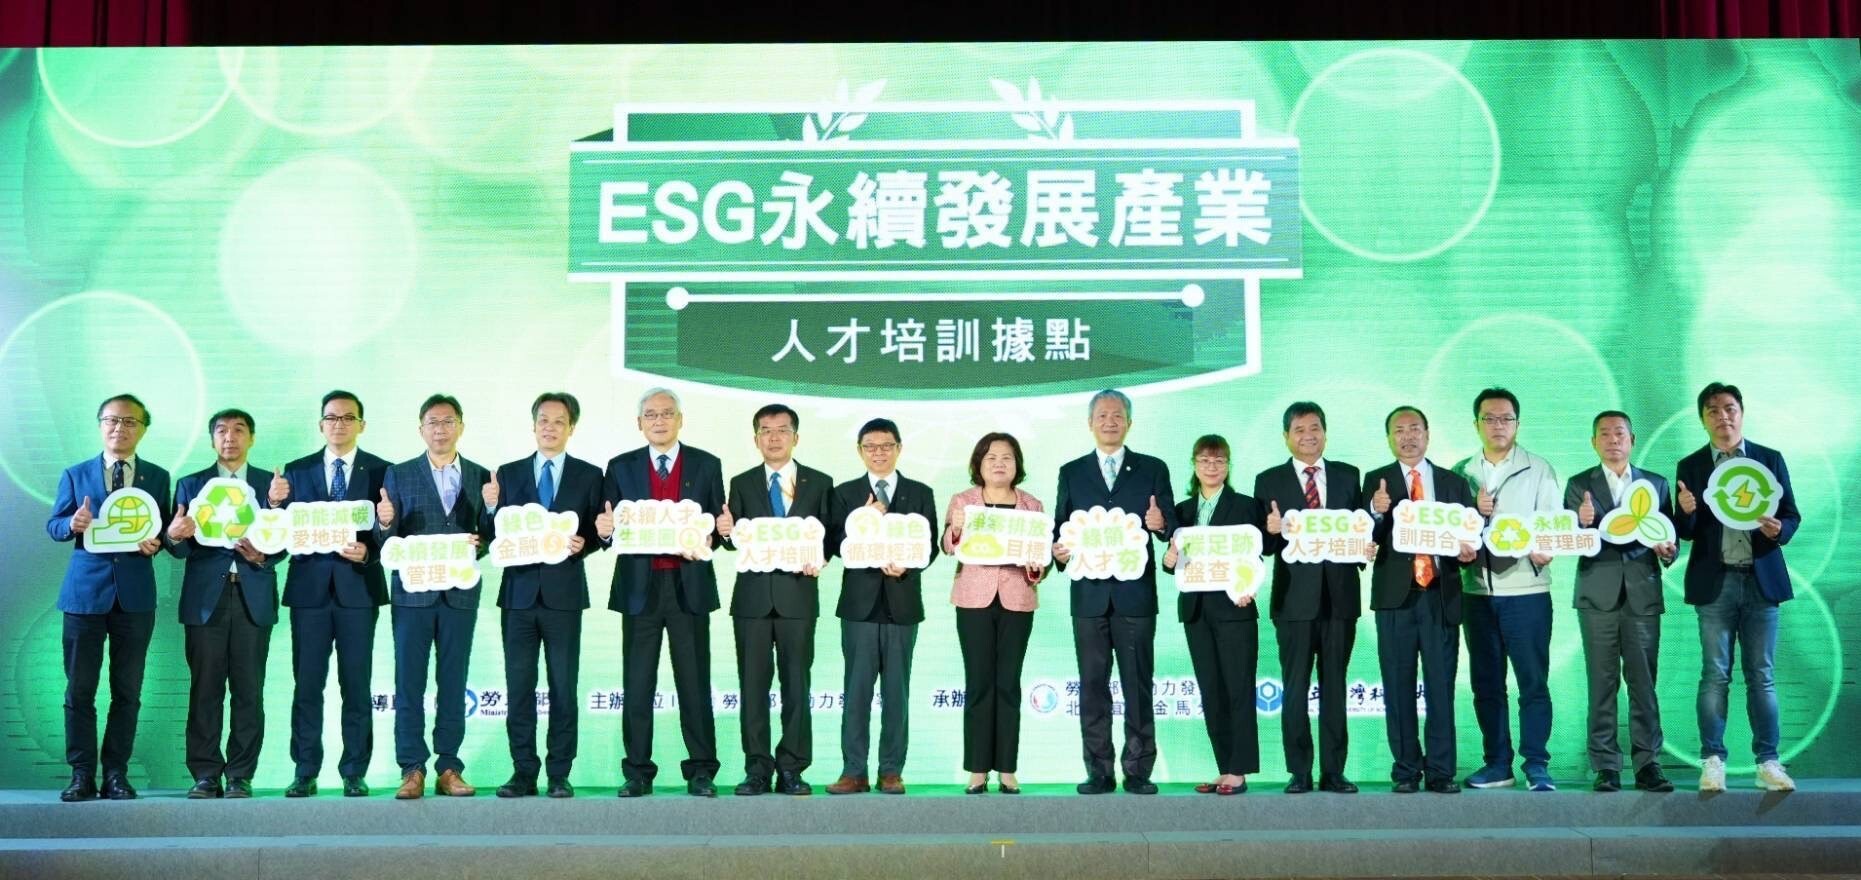 Taiwan Tech, in collaboration with the Workforce Development Agency of the Ministry of Labor, has established the “ESG Sustainable Development Industry Talent Training Base”.